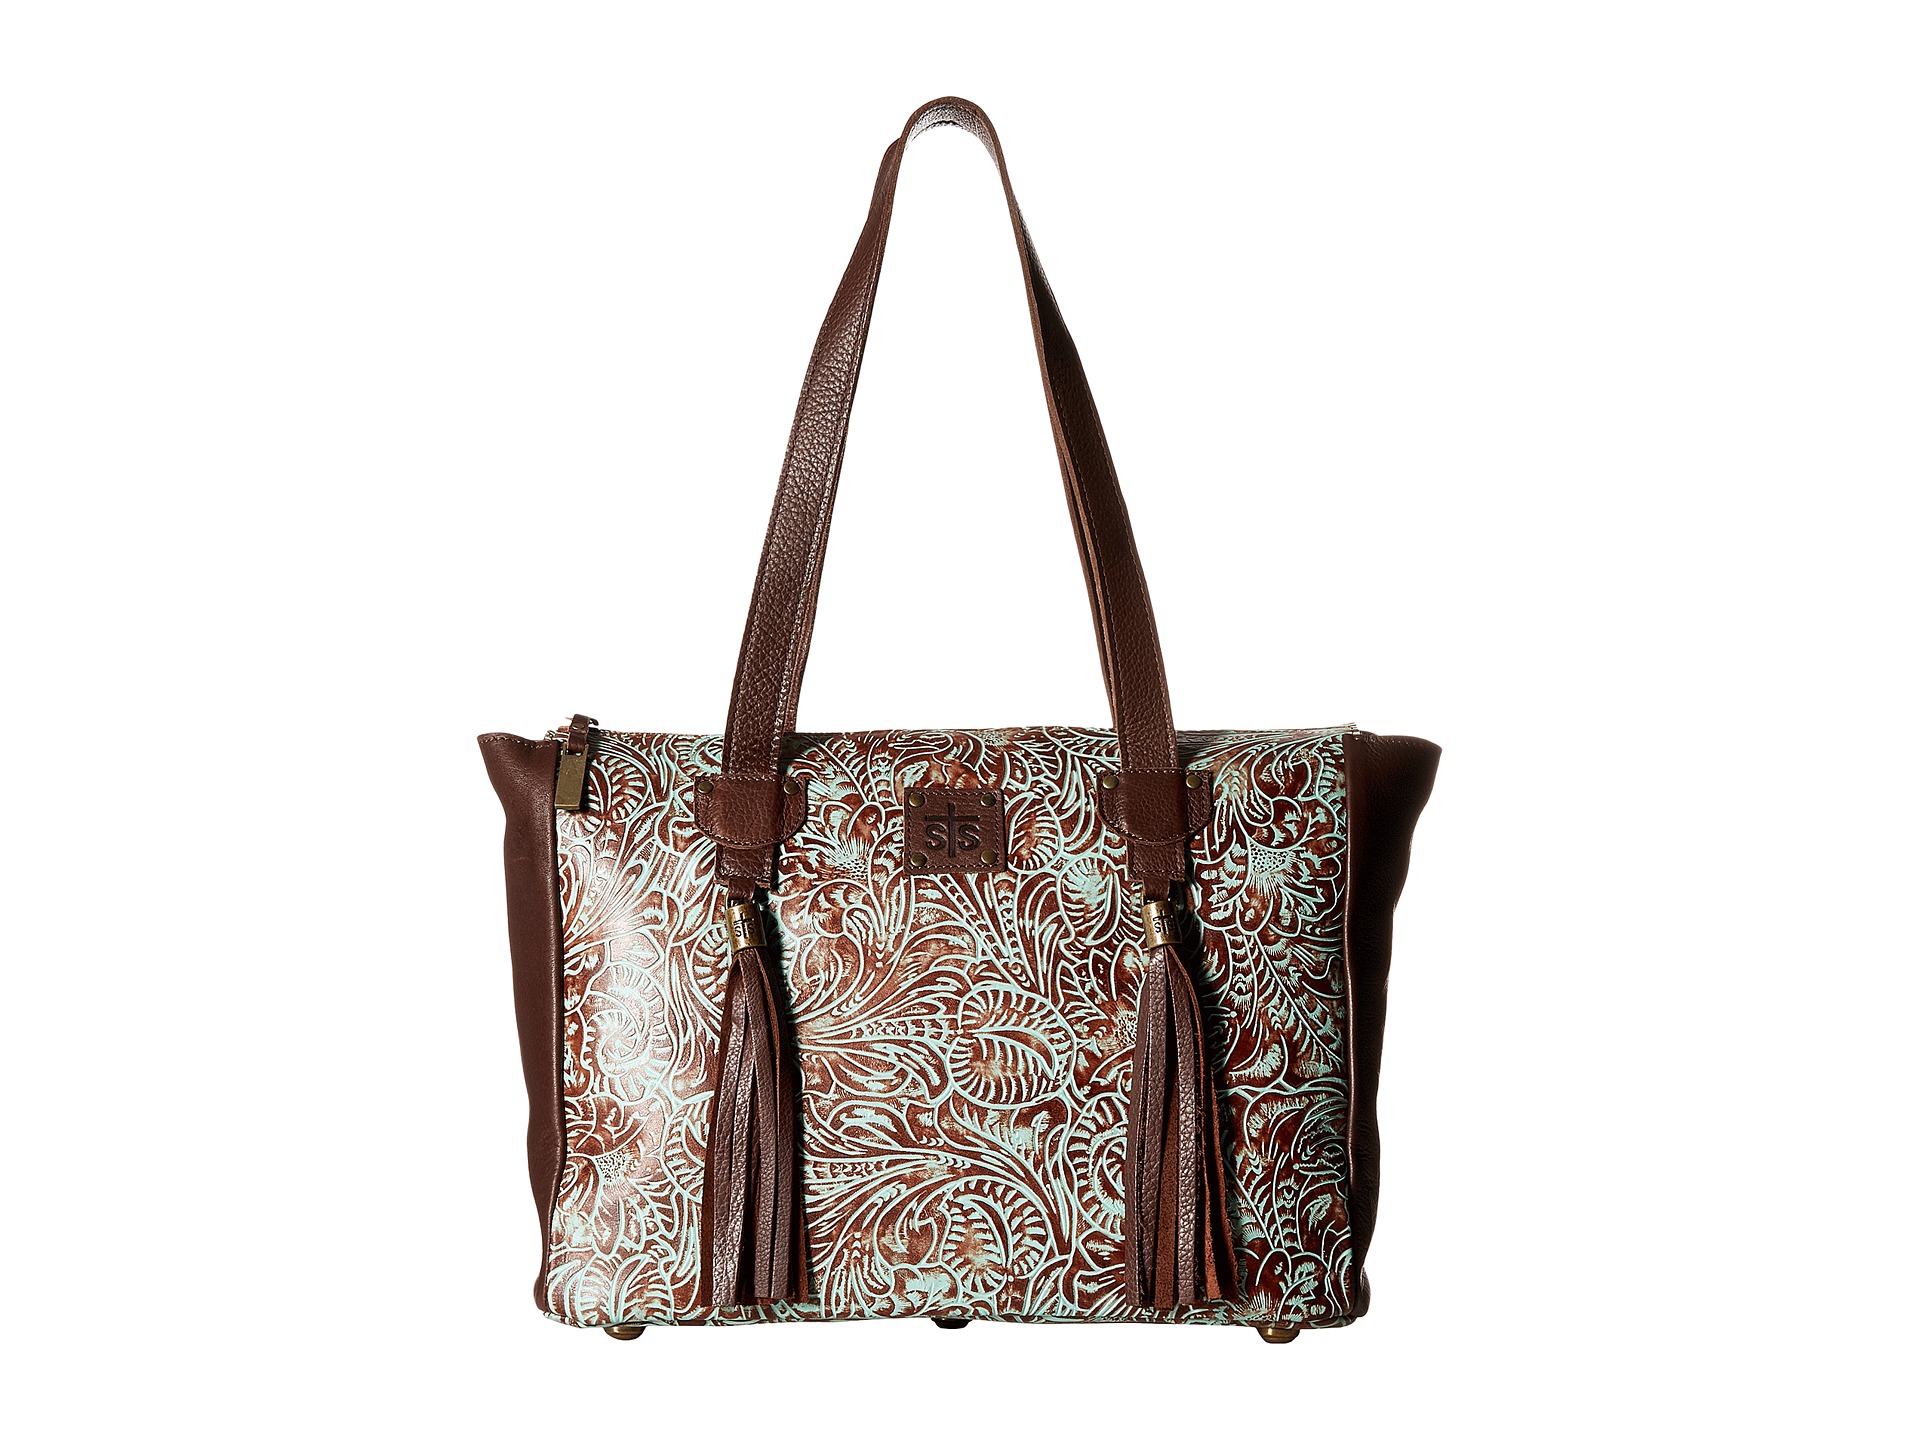 STS Ranchwear The Darling II Tote at Zappos.com